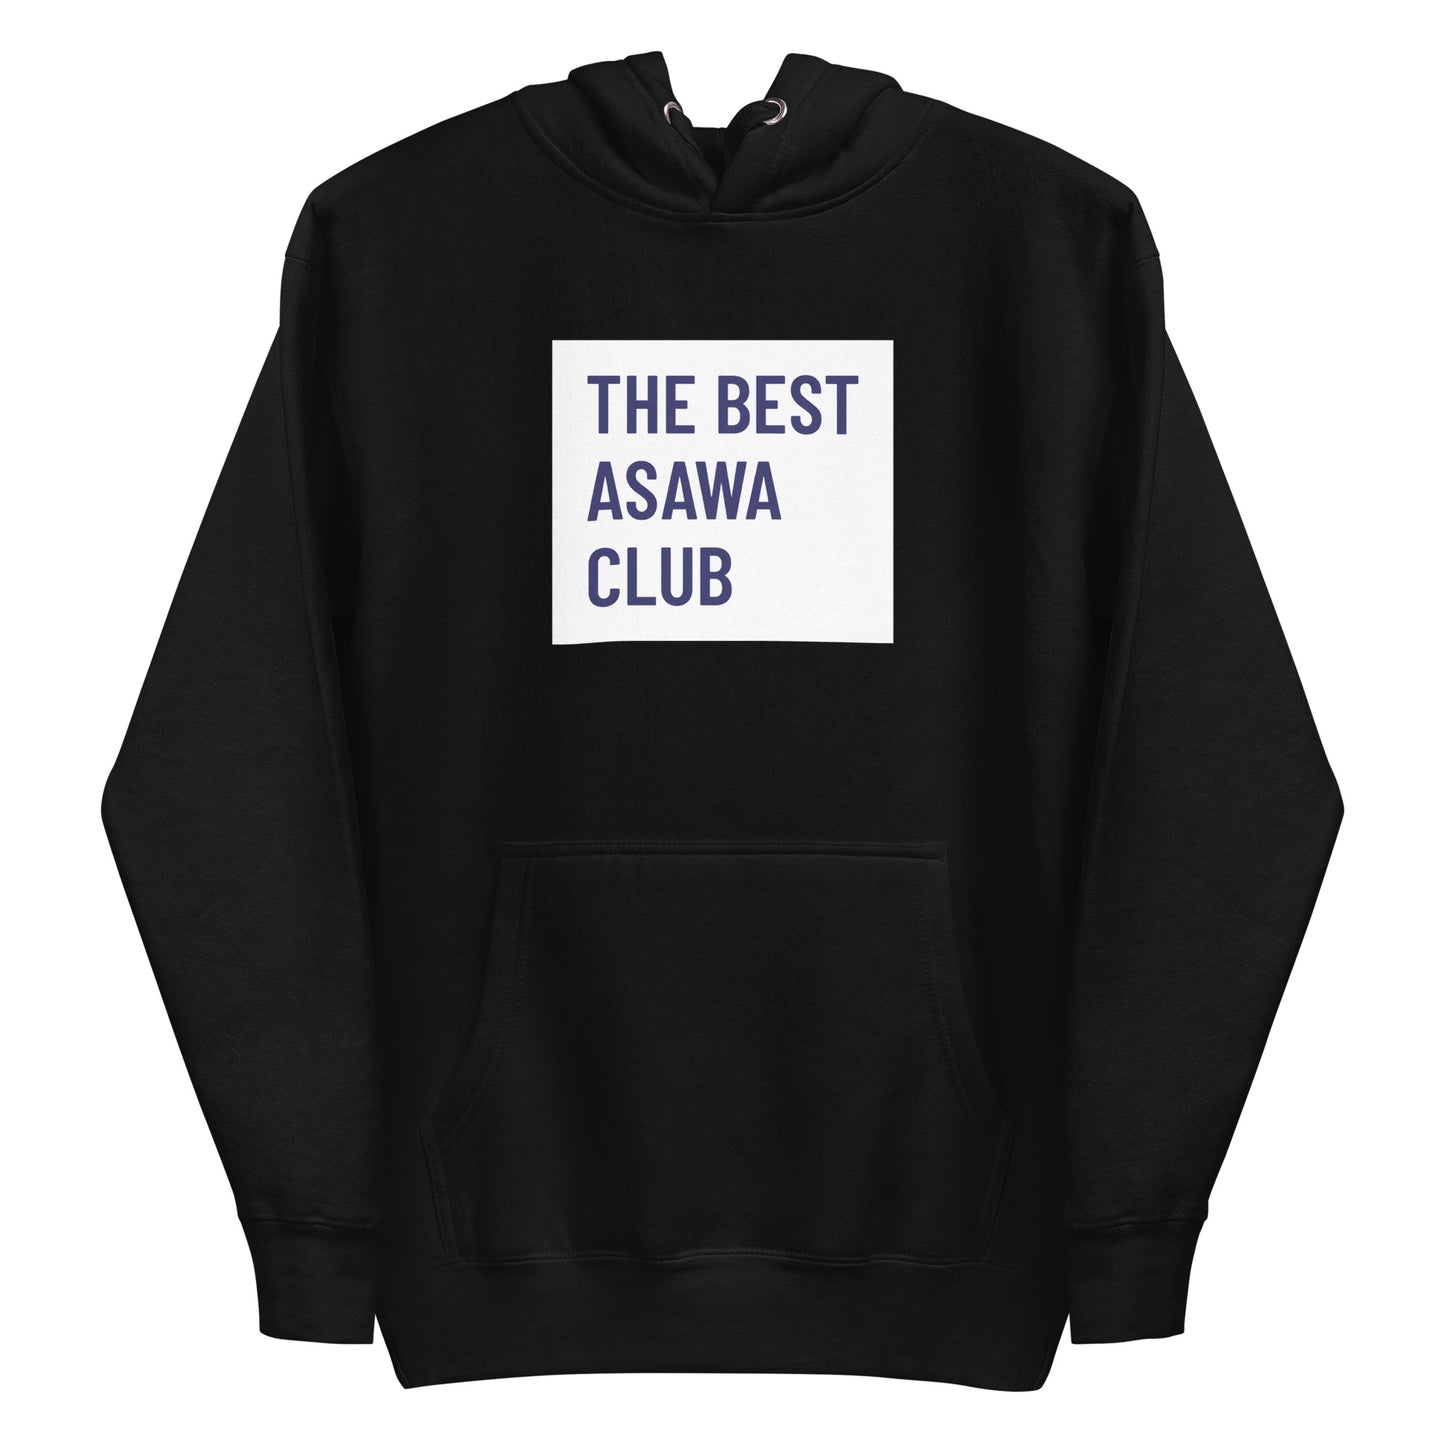 Filipino Hoodie Best Asawa Club Valentine's Day Gift Couple Merch in color variant Black